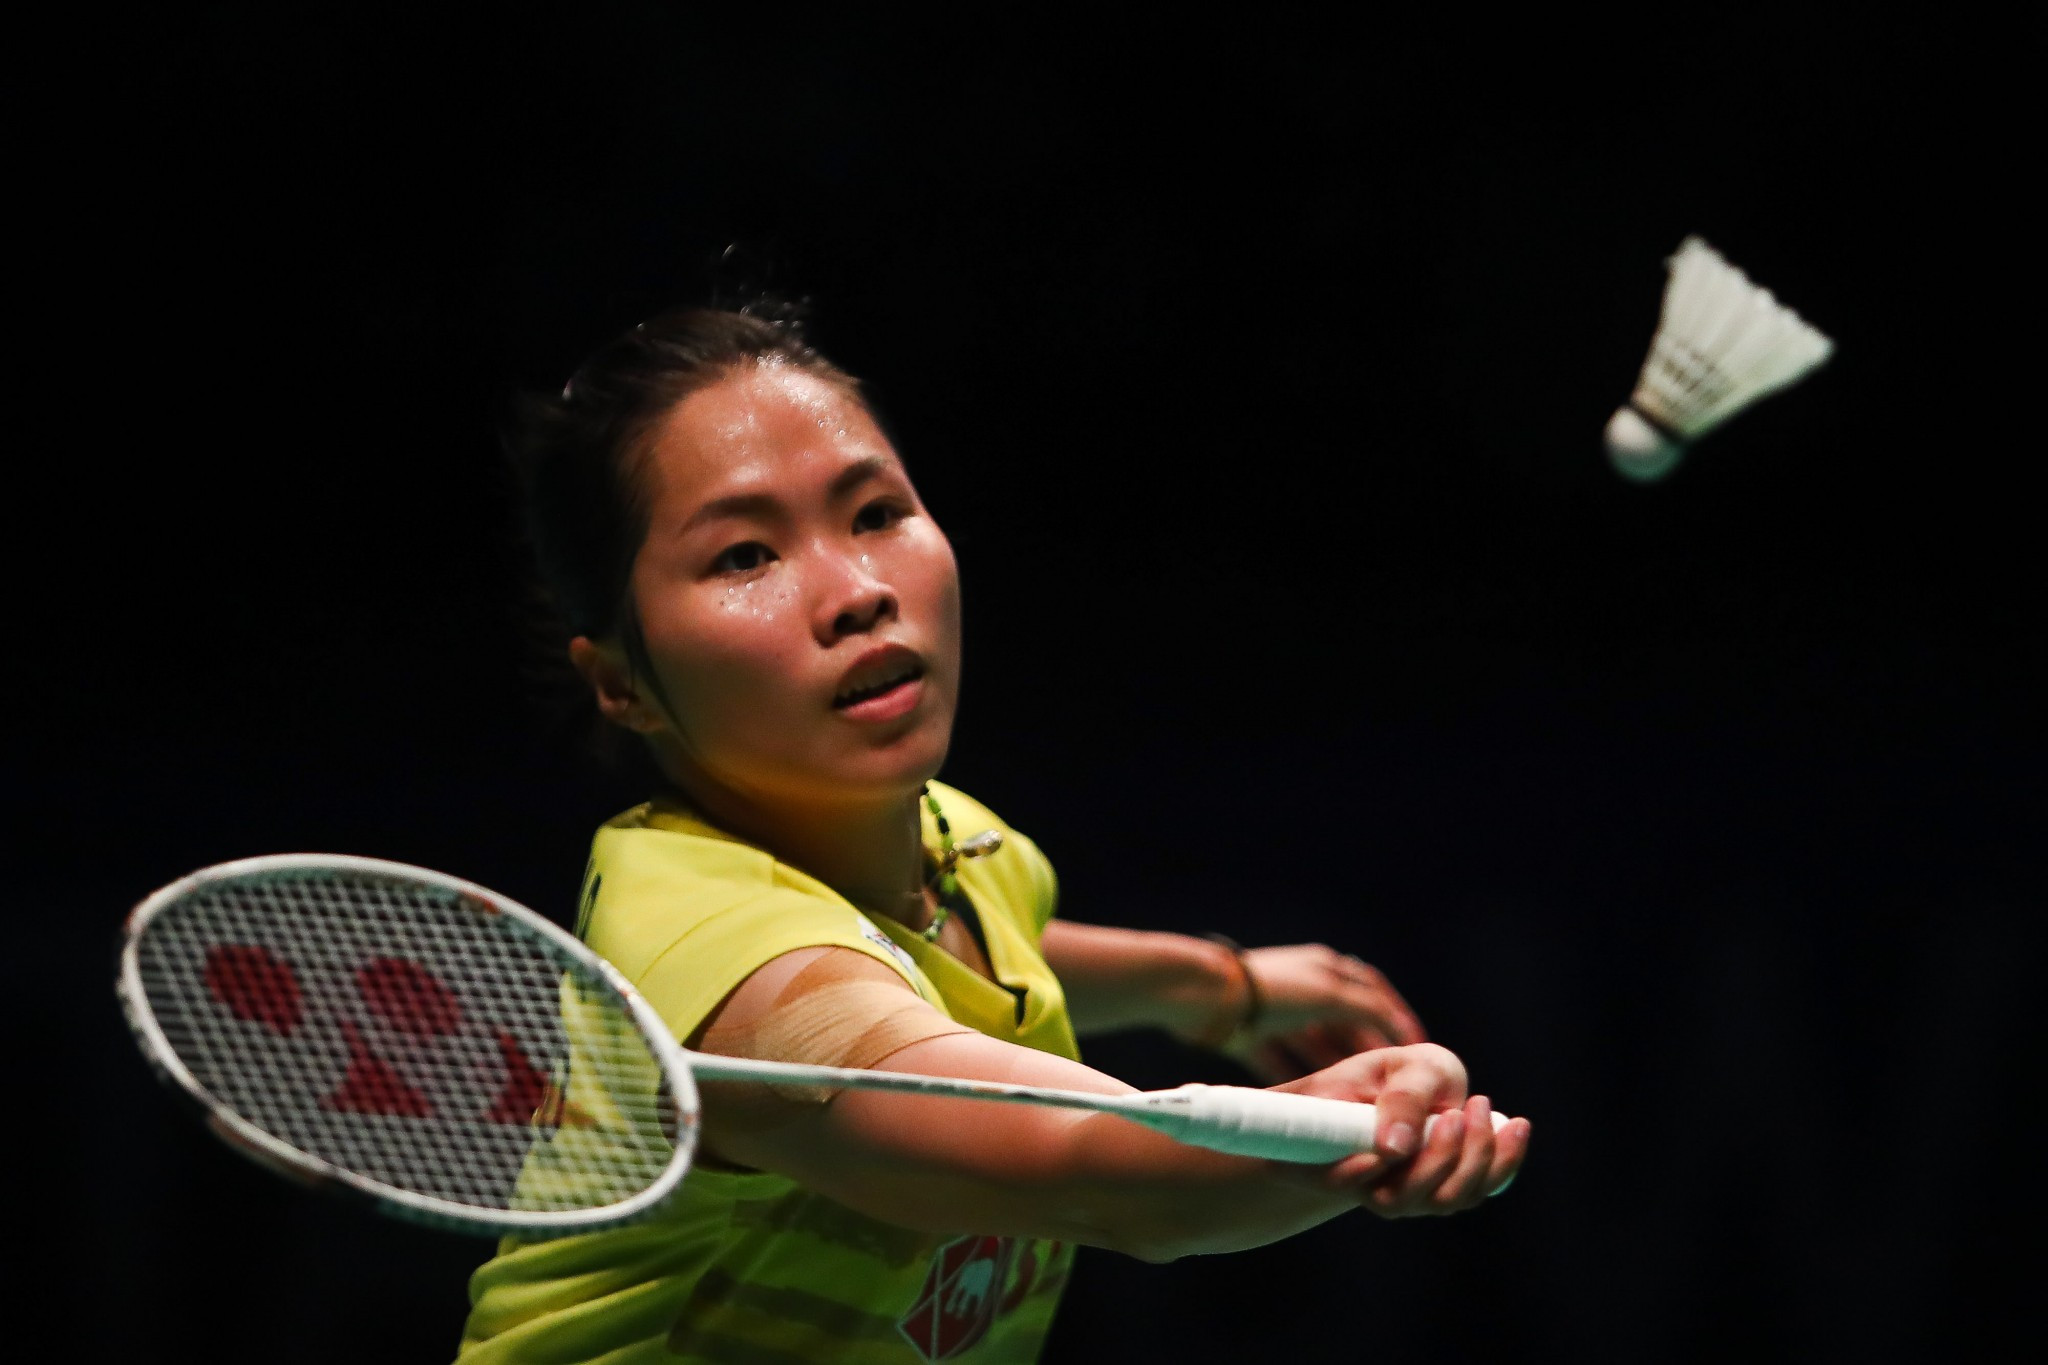 Top seed Ratchanok Intanon of Thailand is through to the second round of the women's singles event at the Badminton World Federation New Zealand Open ©Getty Images